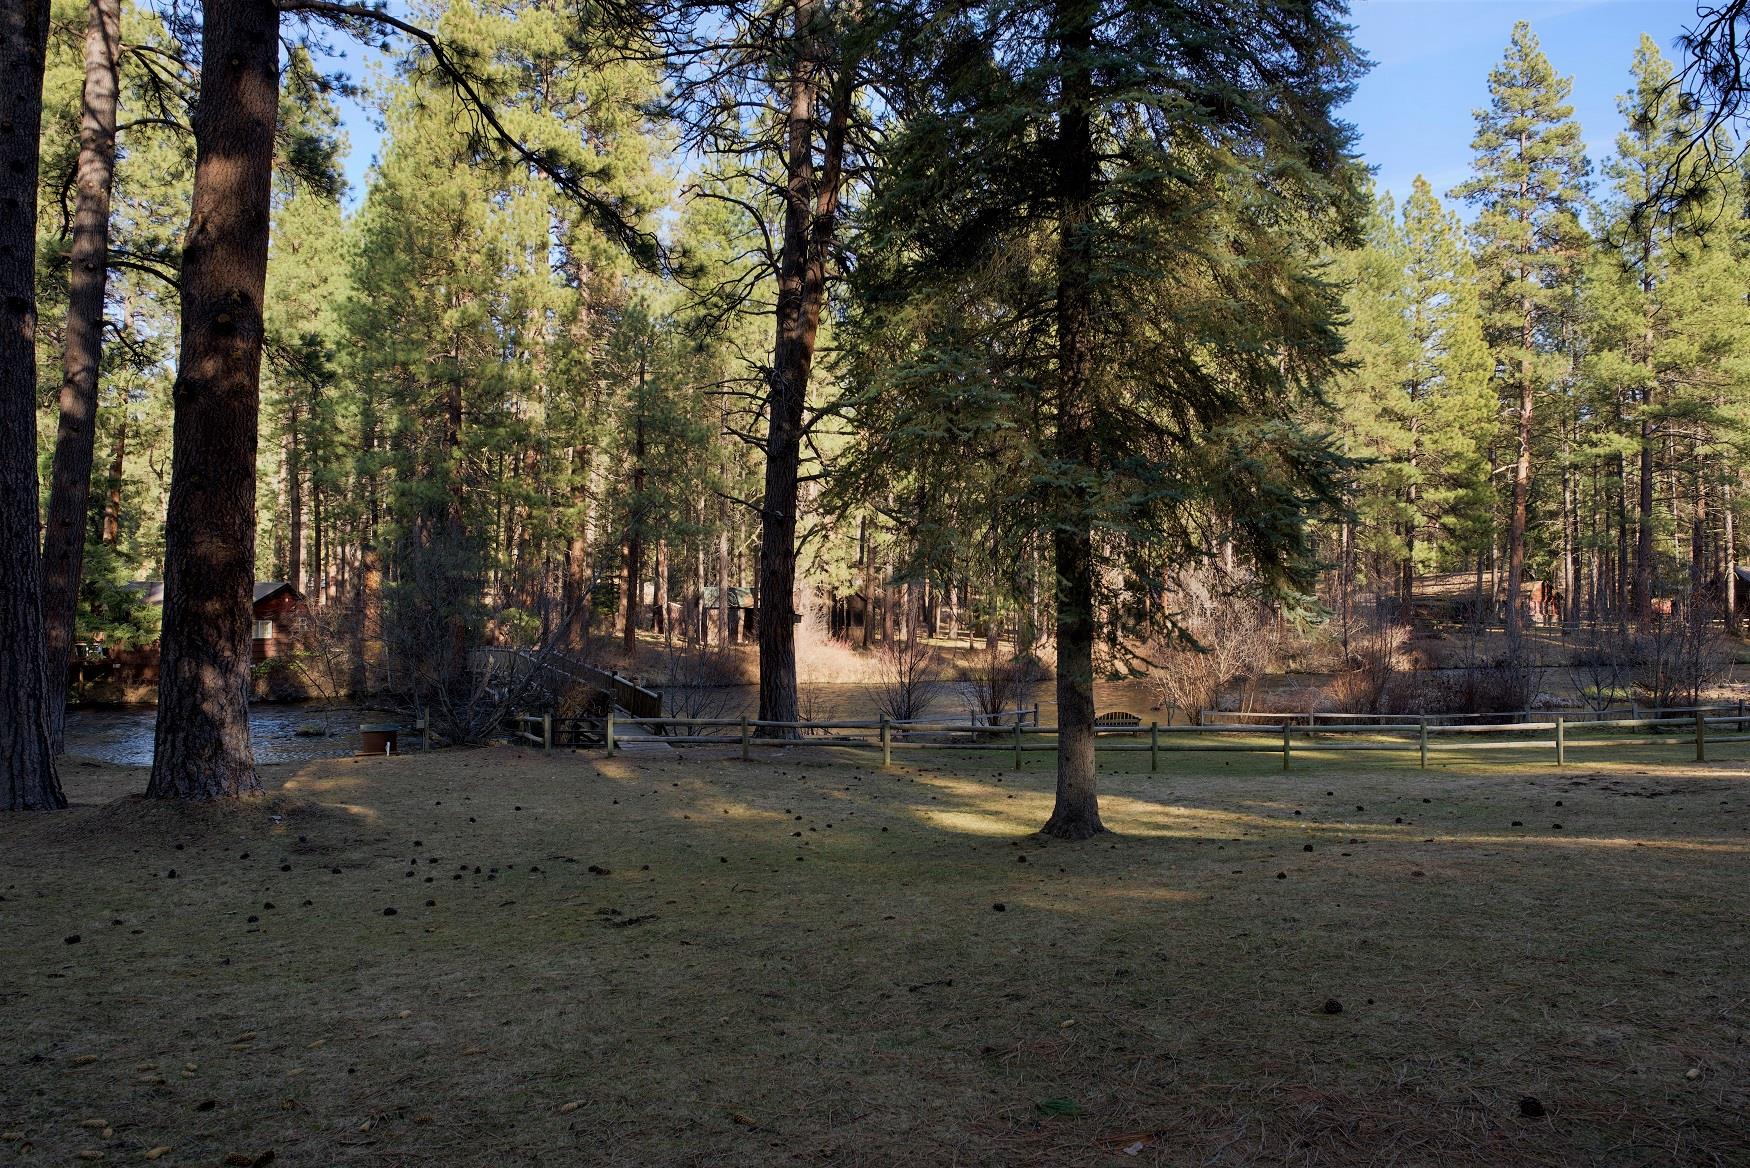 A perfect view of the Metolius River, off the deck of Haberman Cabin, at Cold Springs Resort in Camp Sherman, Oregon